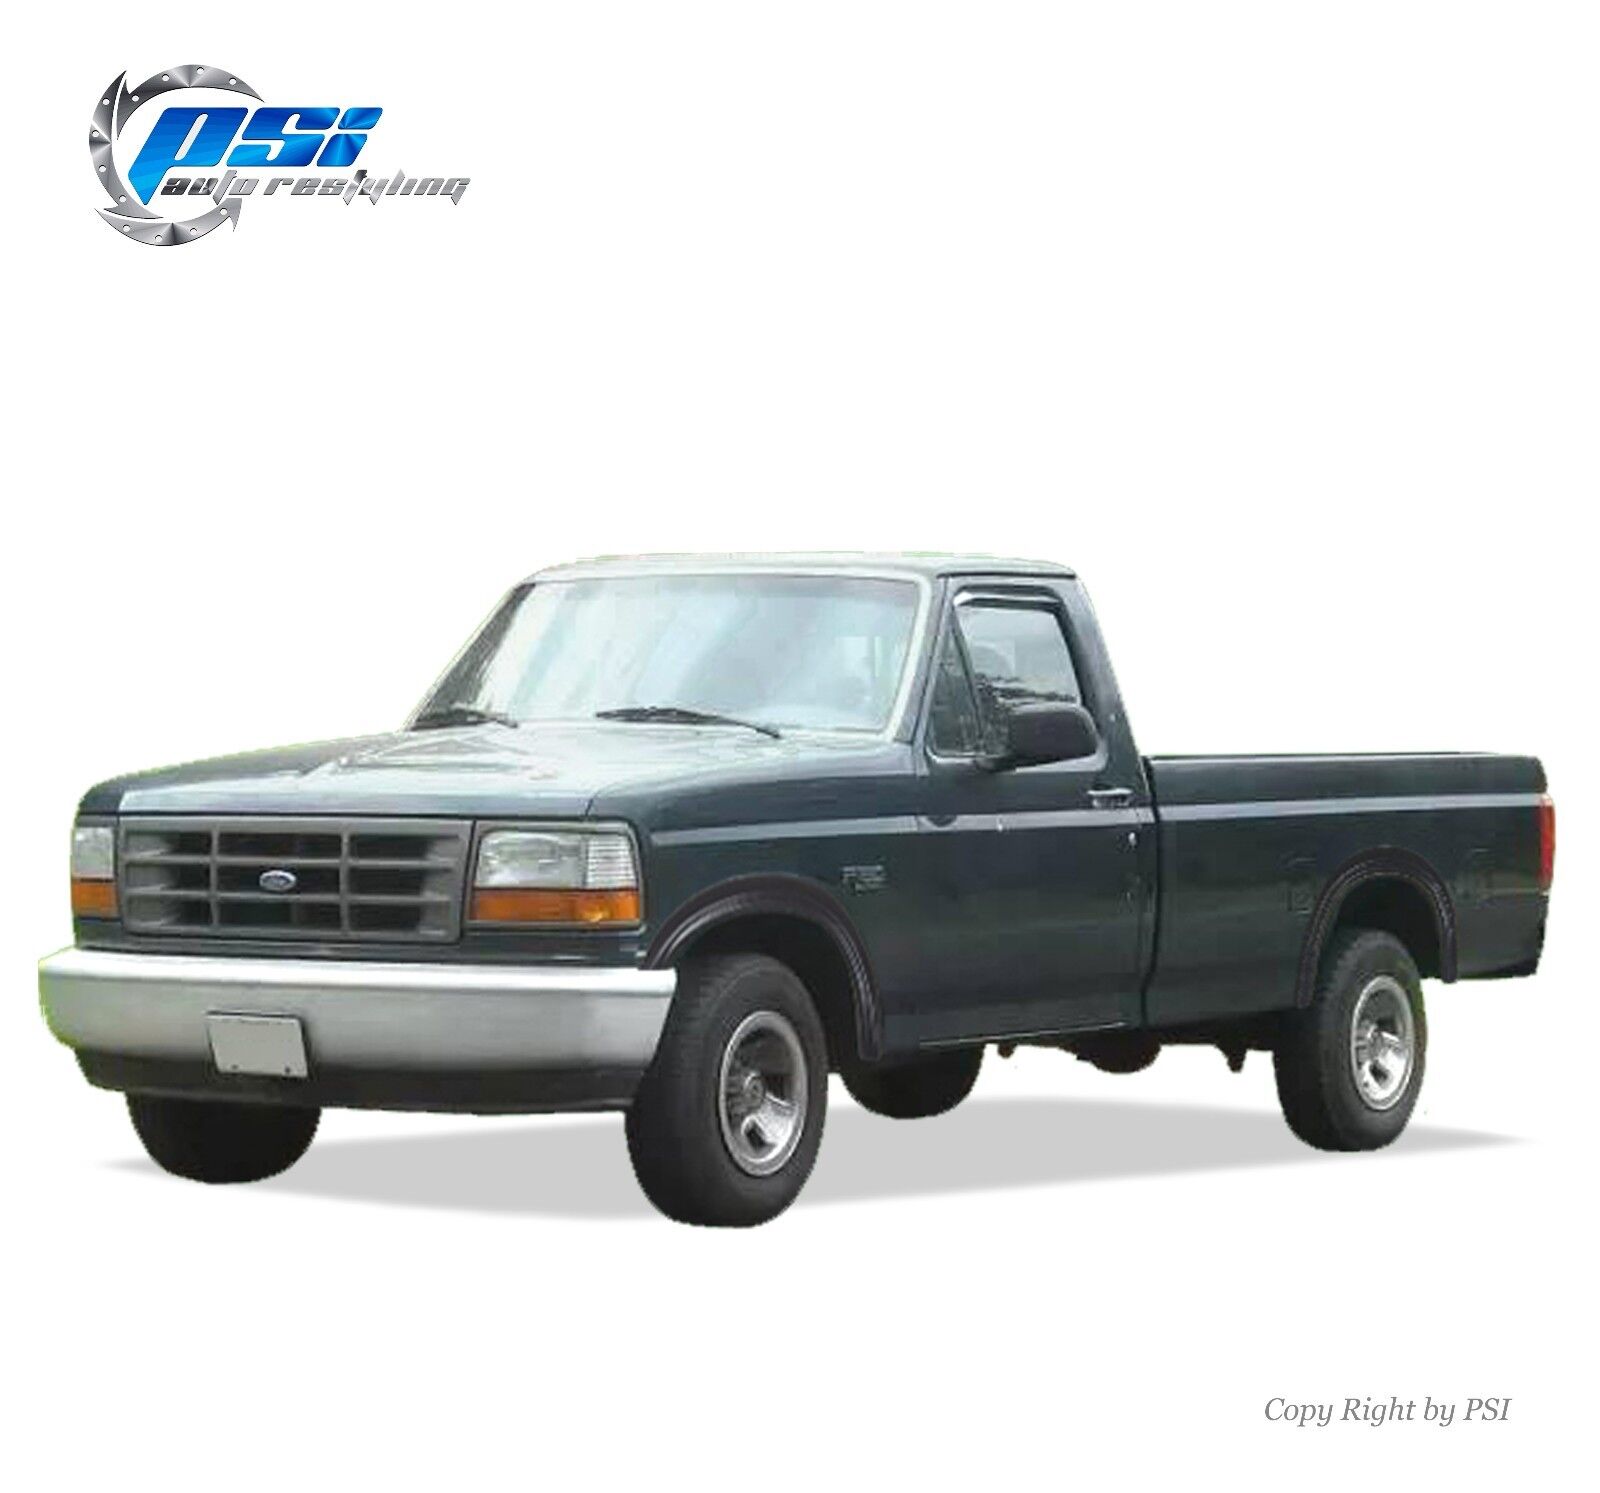 Black Paintable Rugged Style Fender Flares 92-96 Ford F-150 F-250 F-350 Bronco